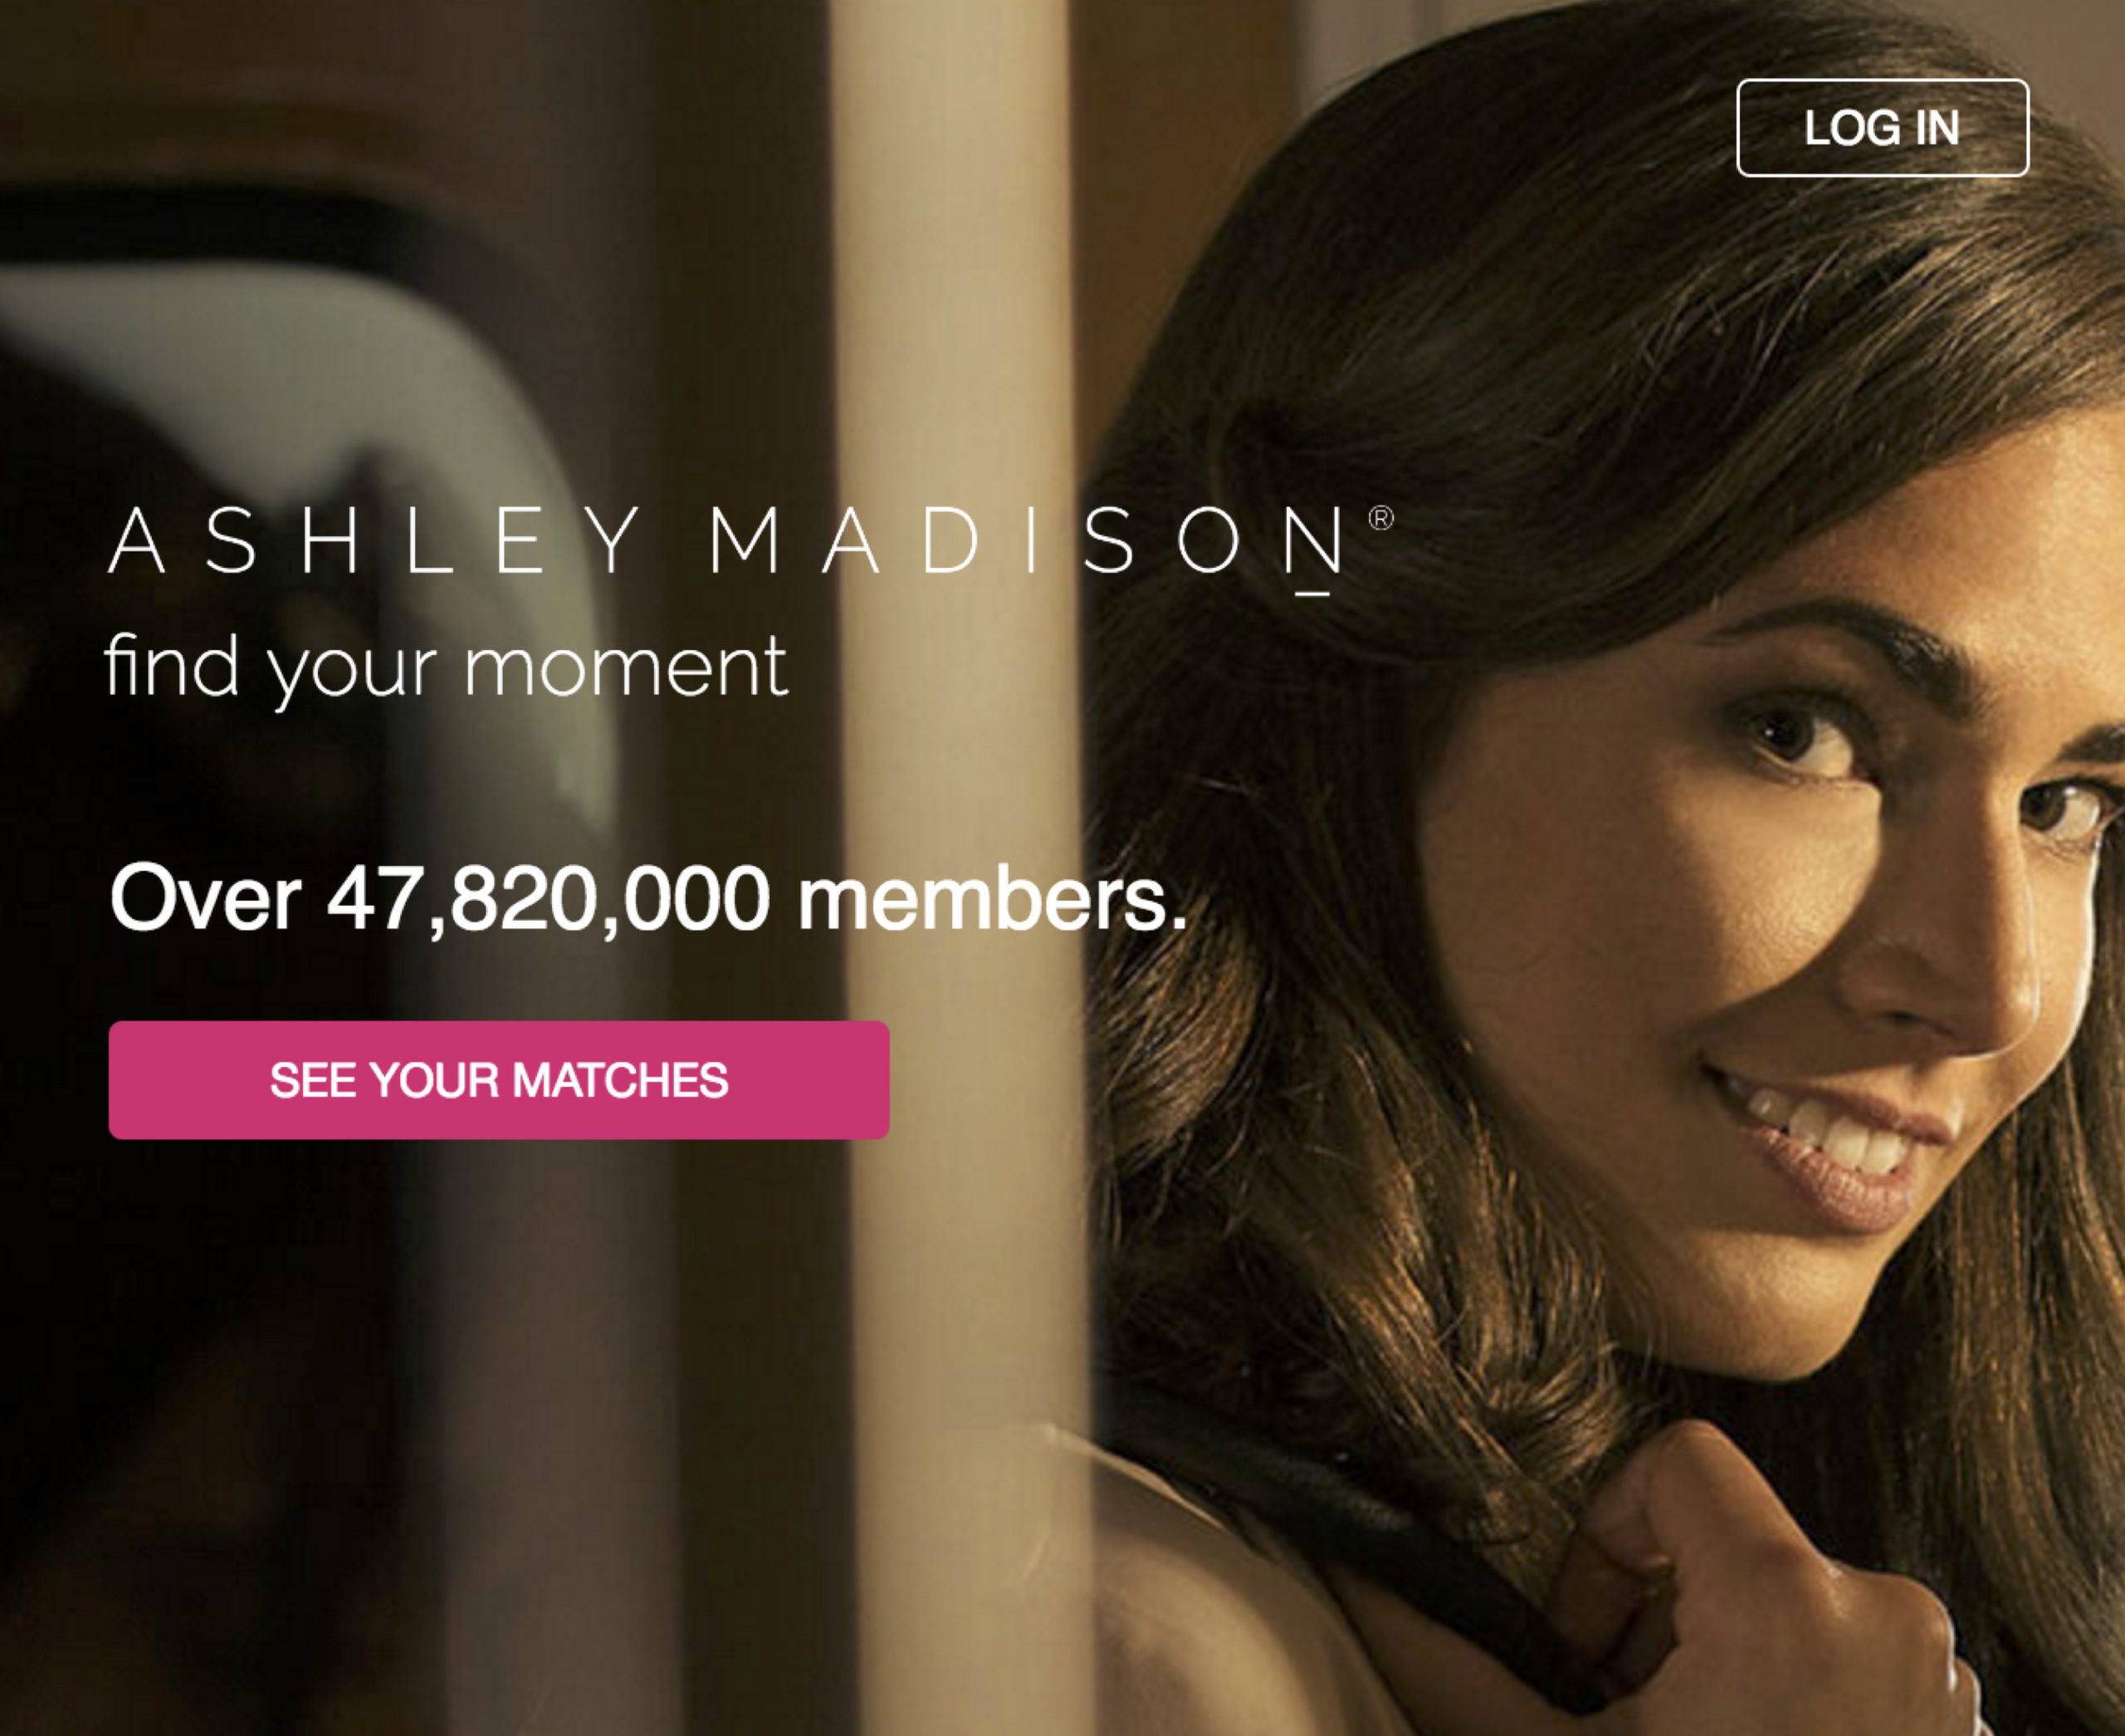 The Risque (Rebranding) Business of Ashley Madison